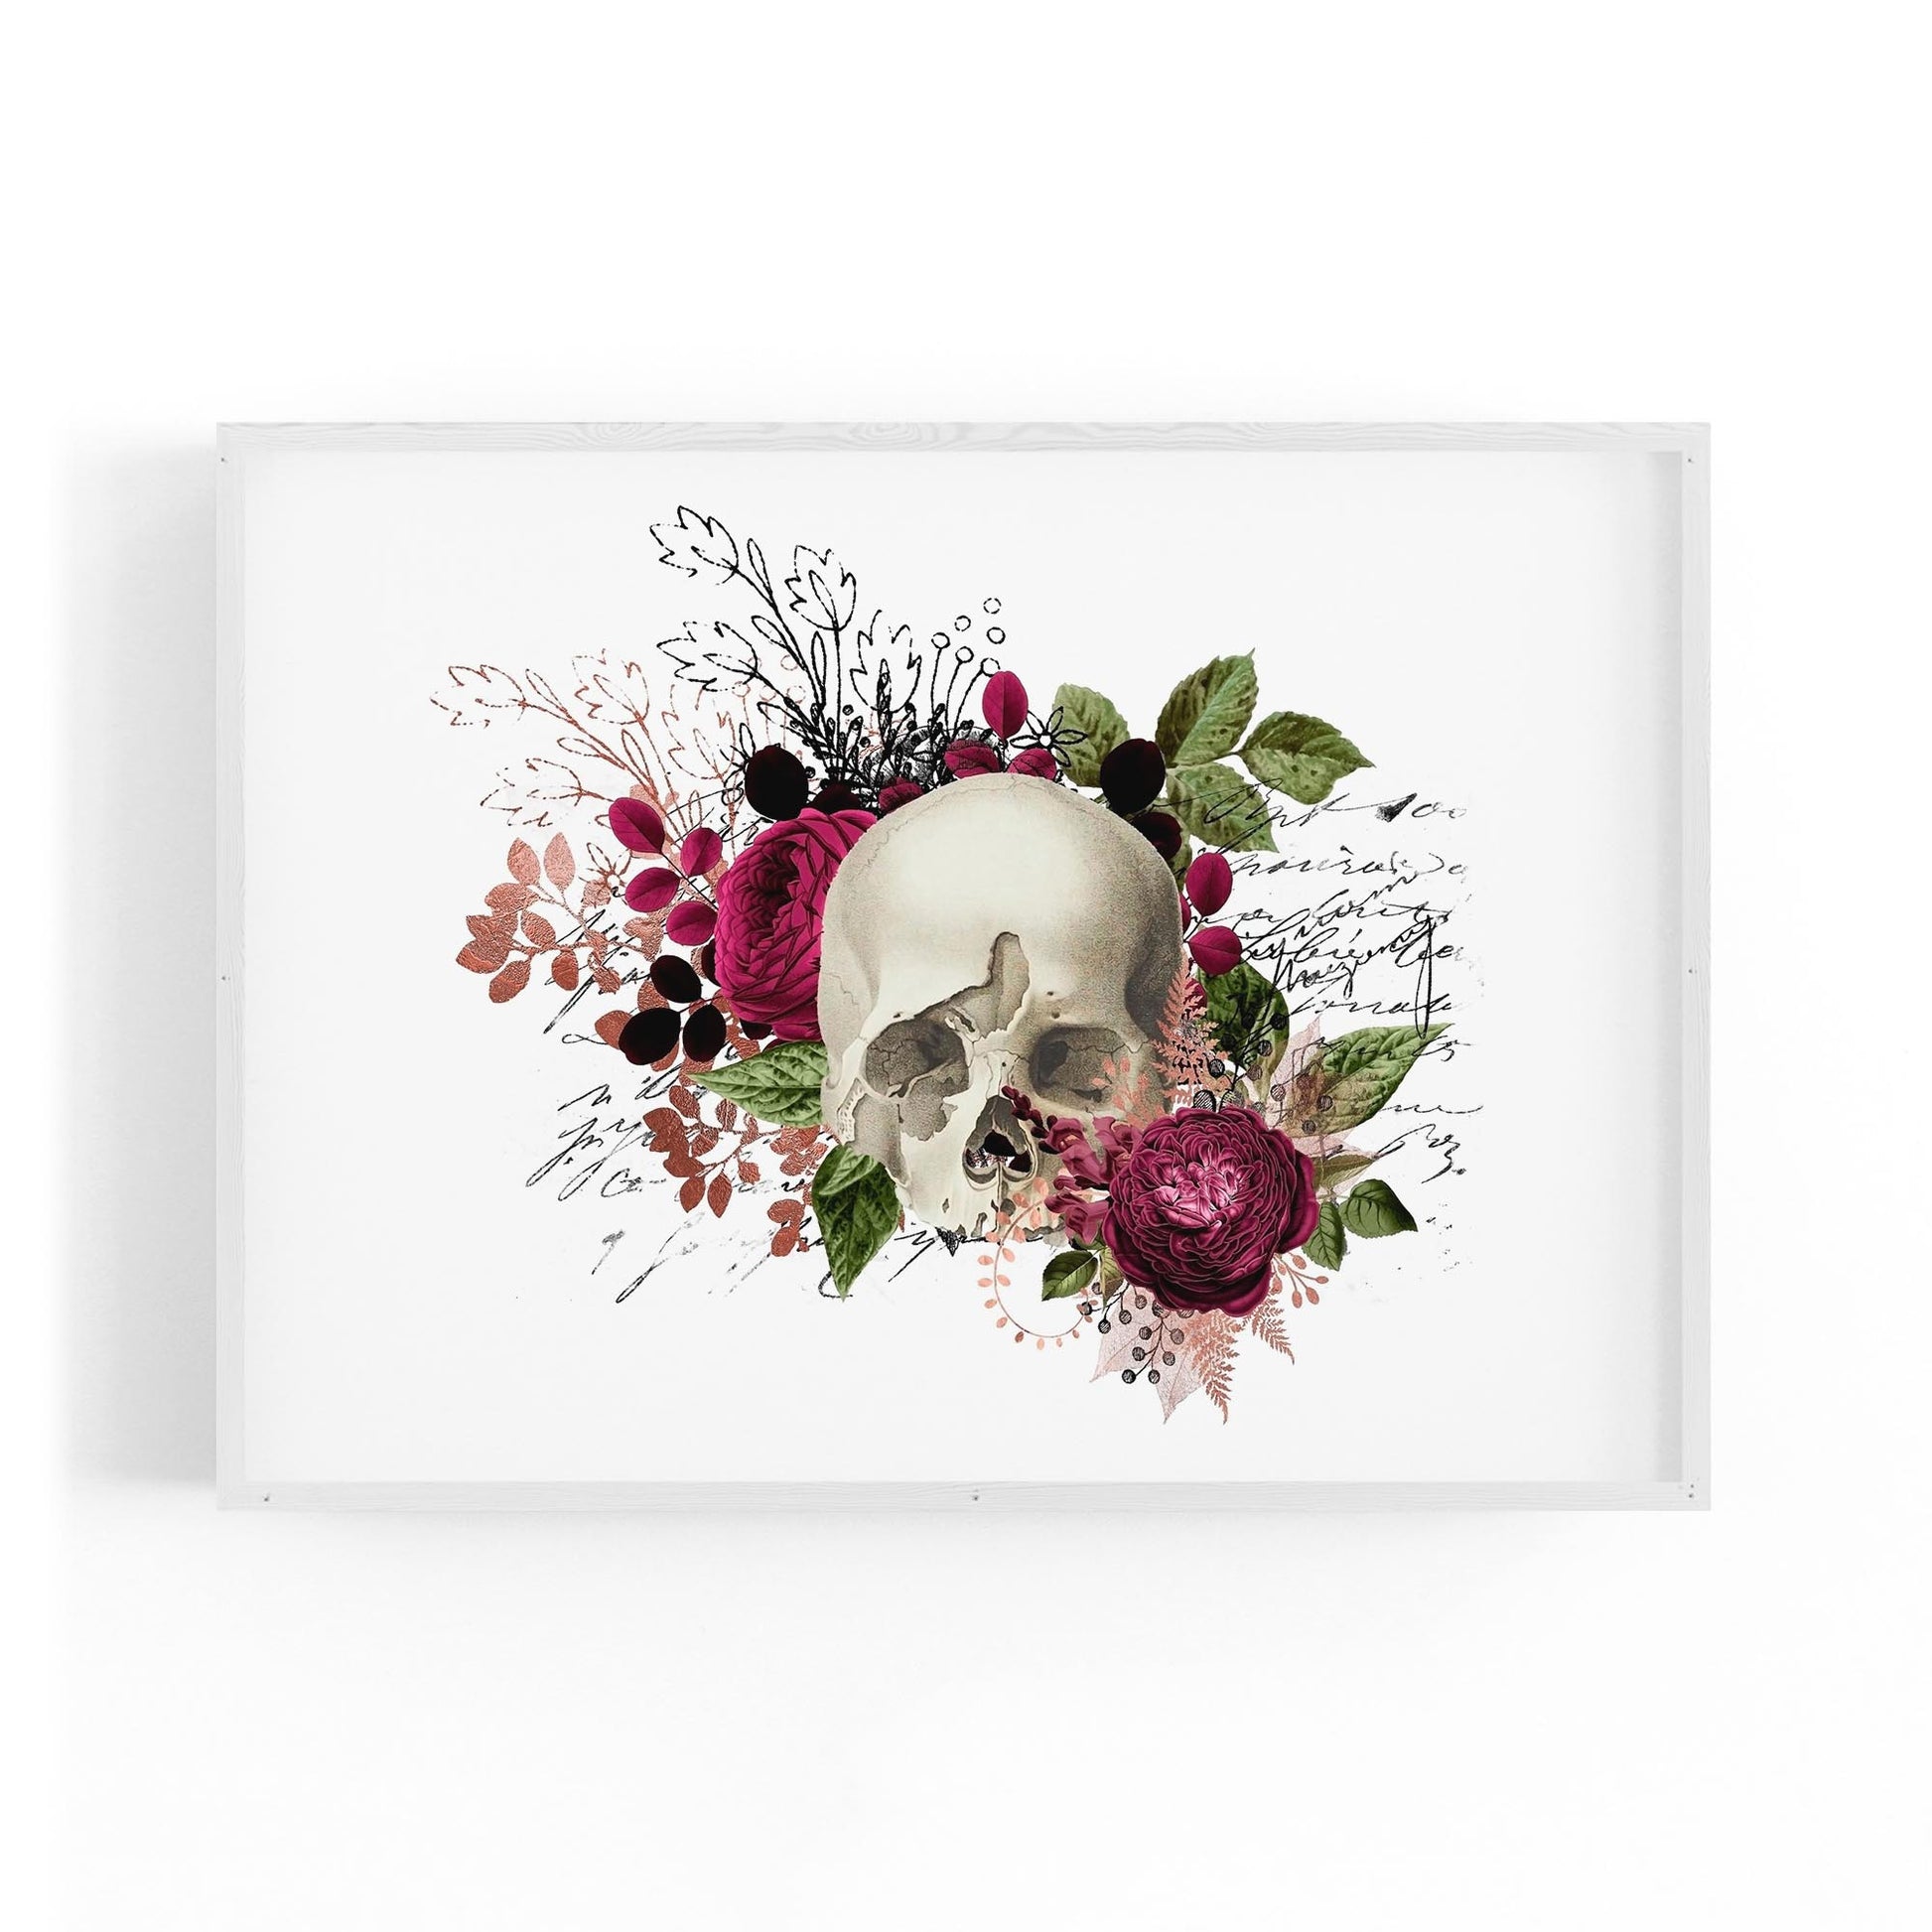 Purple Floral Skull Fashion Girls Bedroom Wall Art #1 - The Affordable Art Company